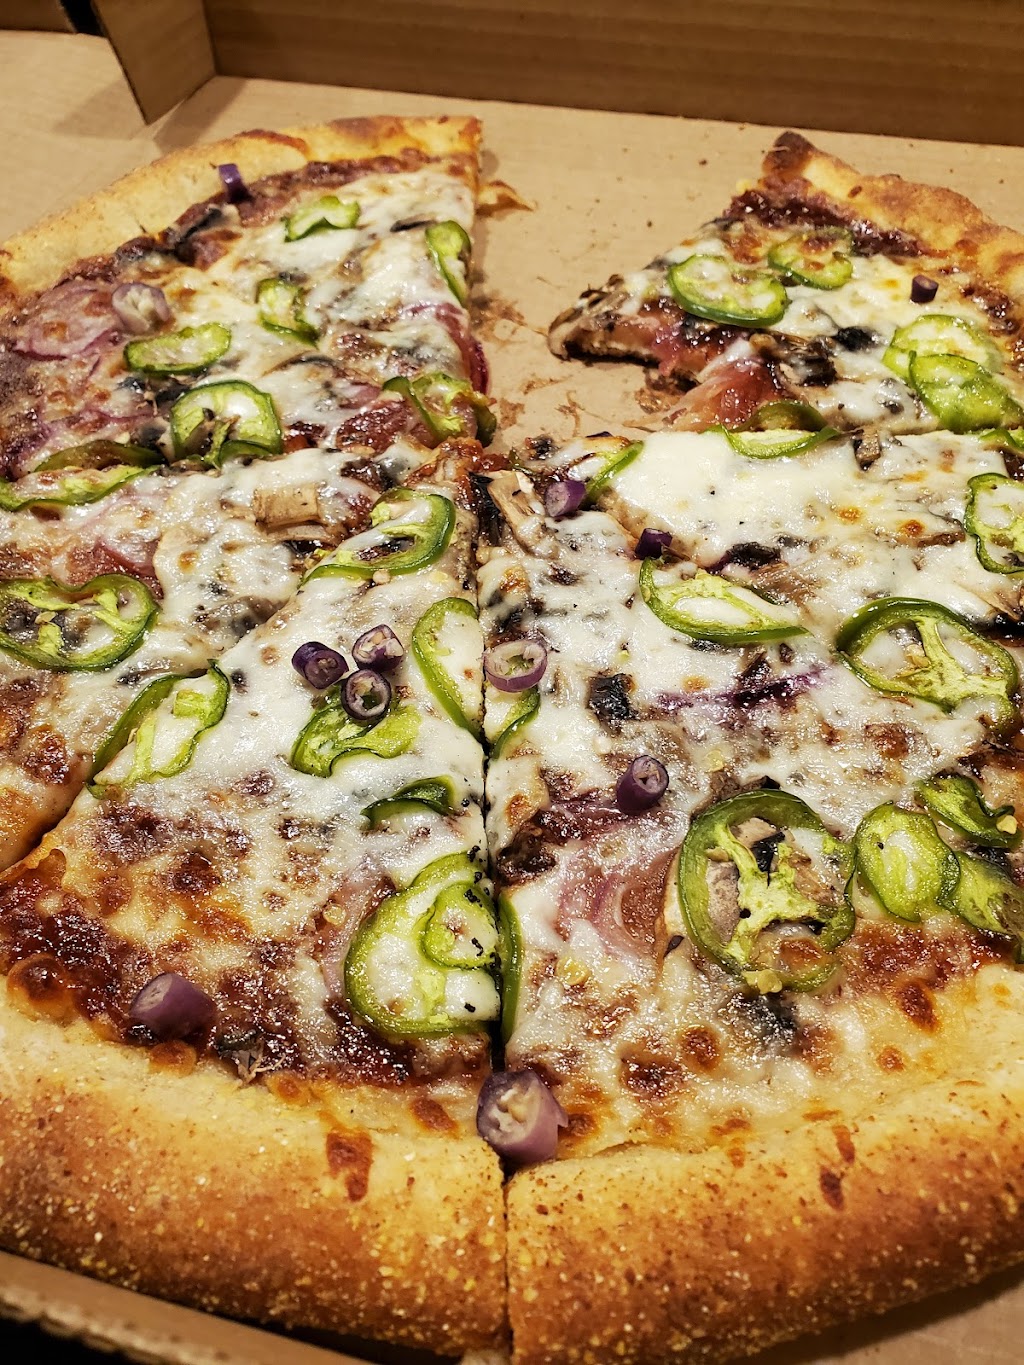 Talisman Pizza | meal delivery | 56 Talisman Dr #3, Pagosa Springs, CO 81147, USA | 9704225544 OR +1 970-422-5544